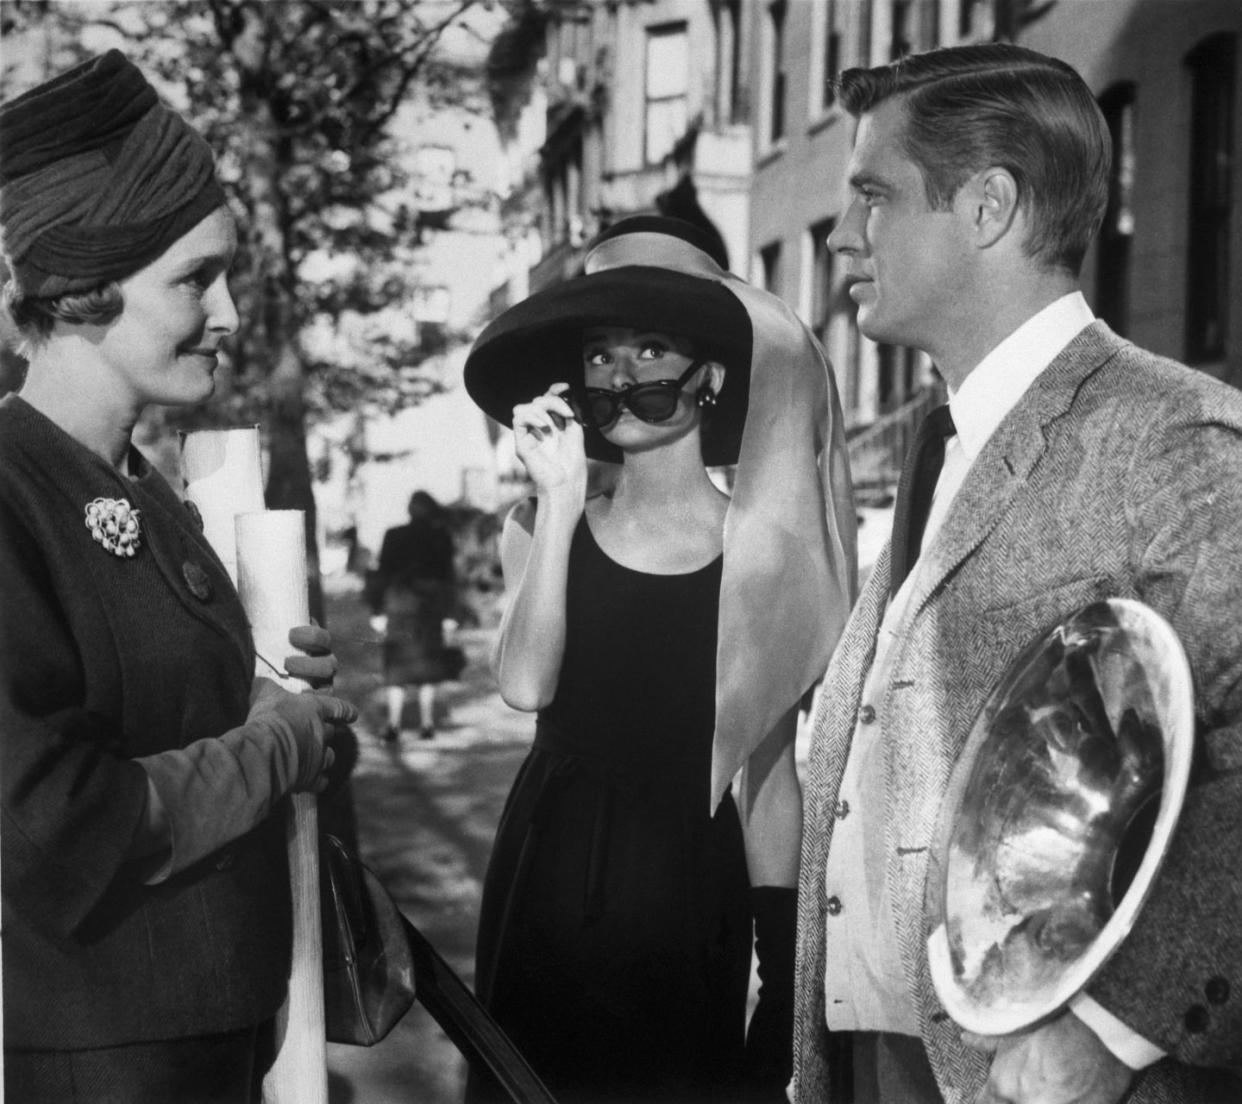 patricia neal, audrey hepburn and george peppard in breakfast at tiffany's